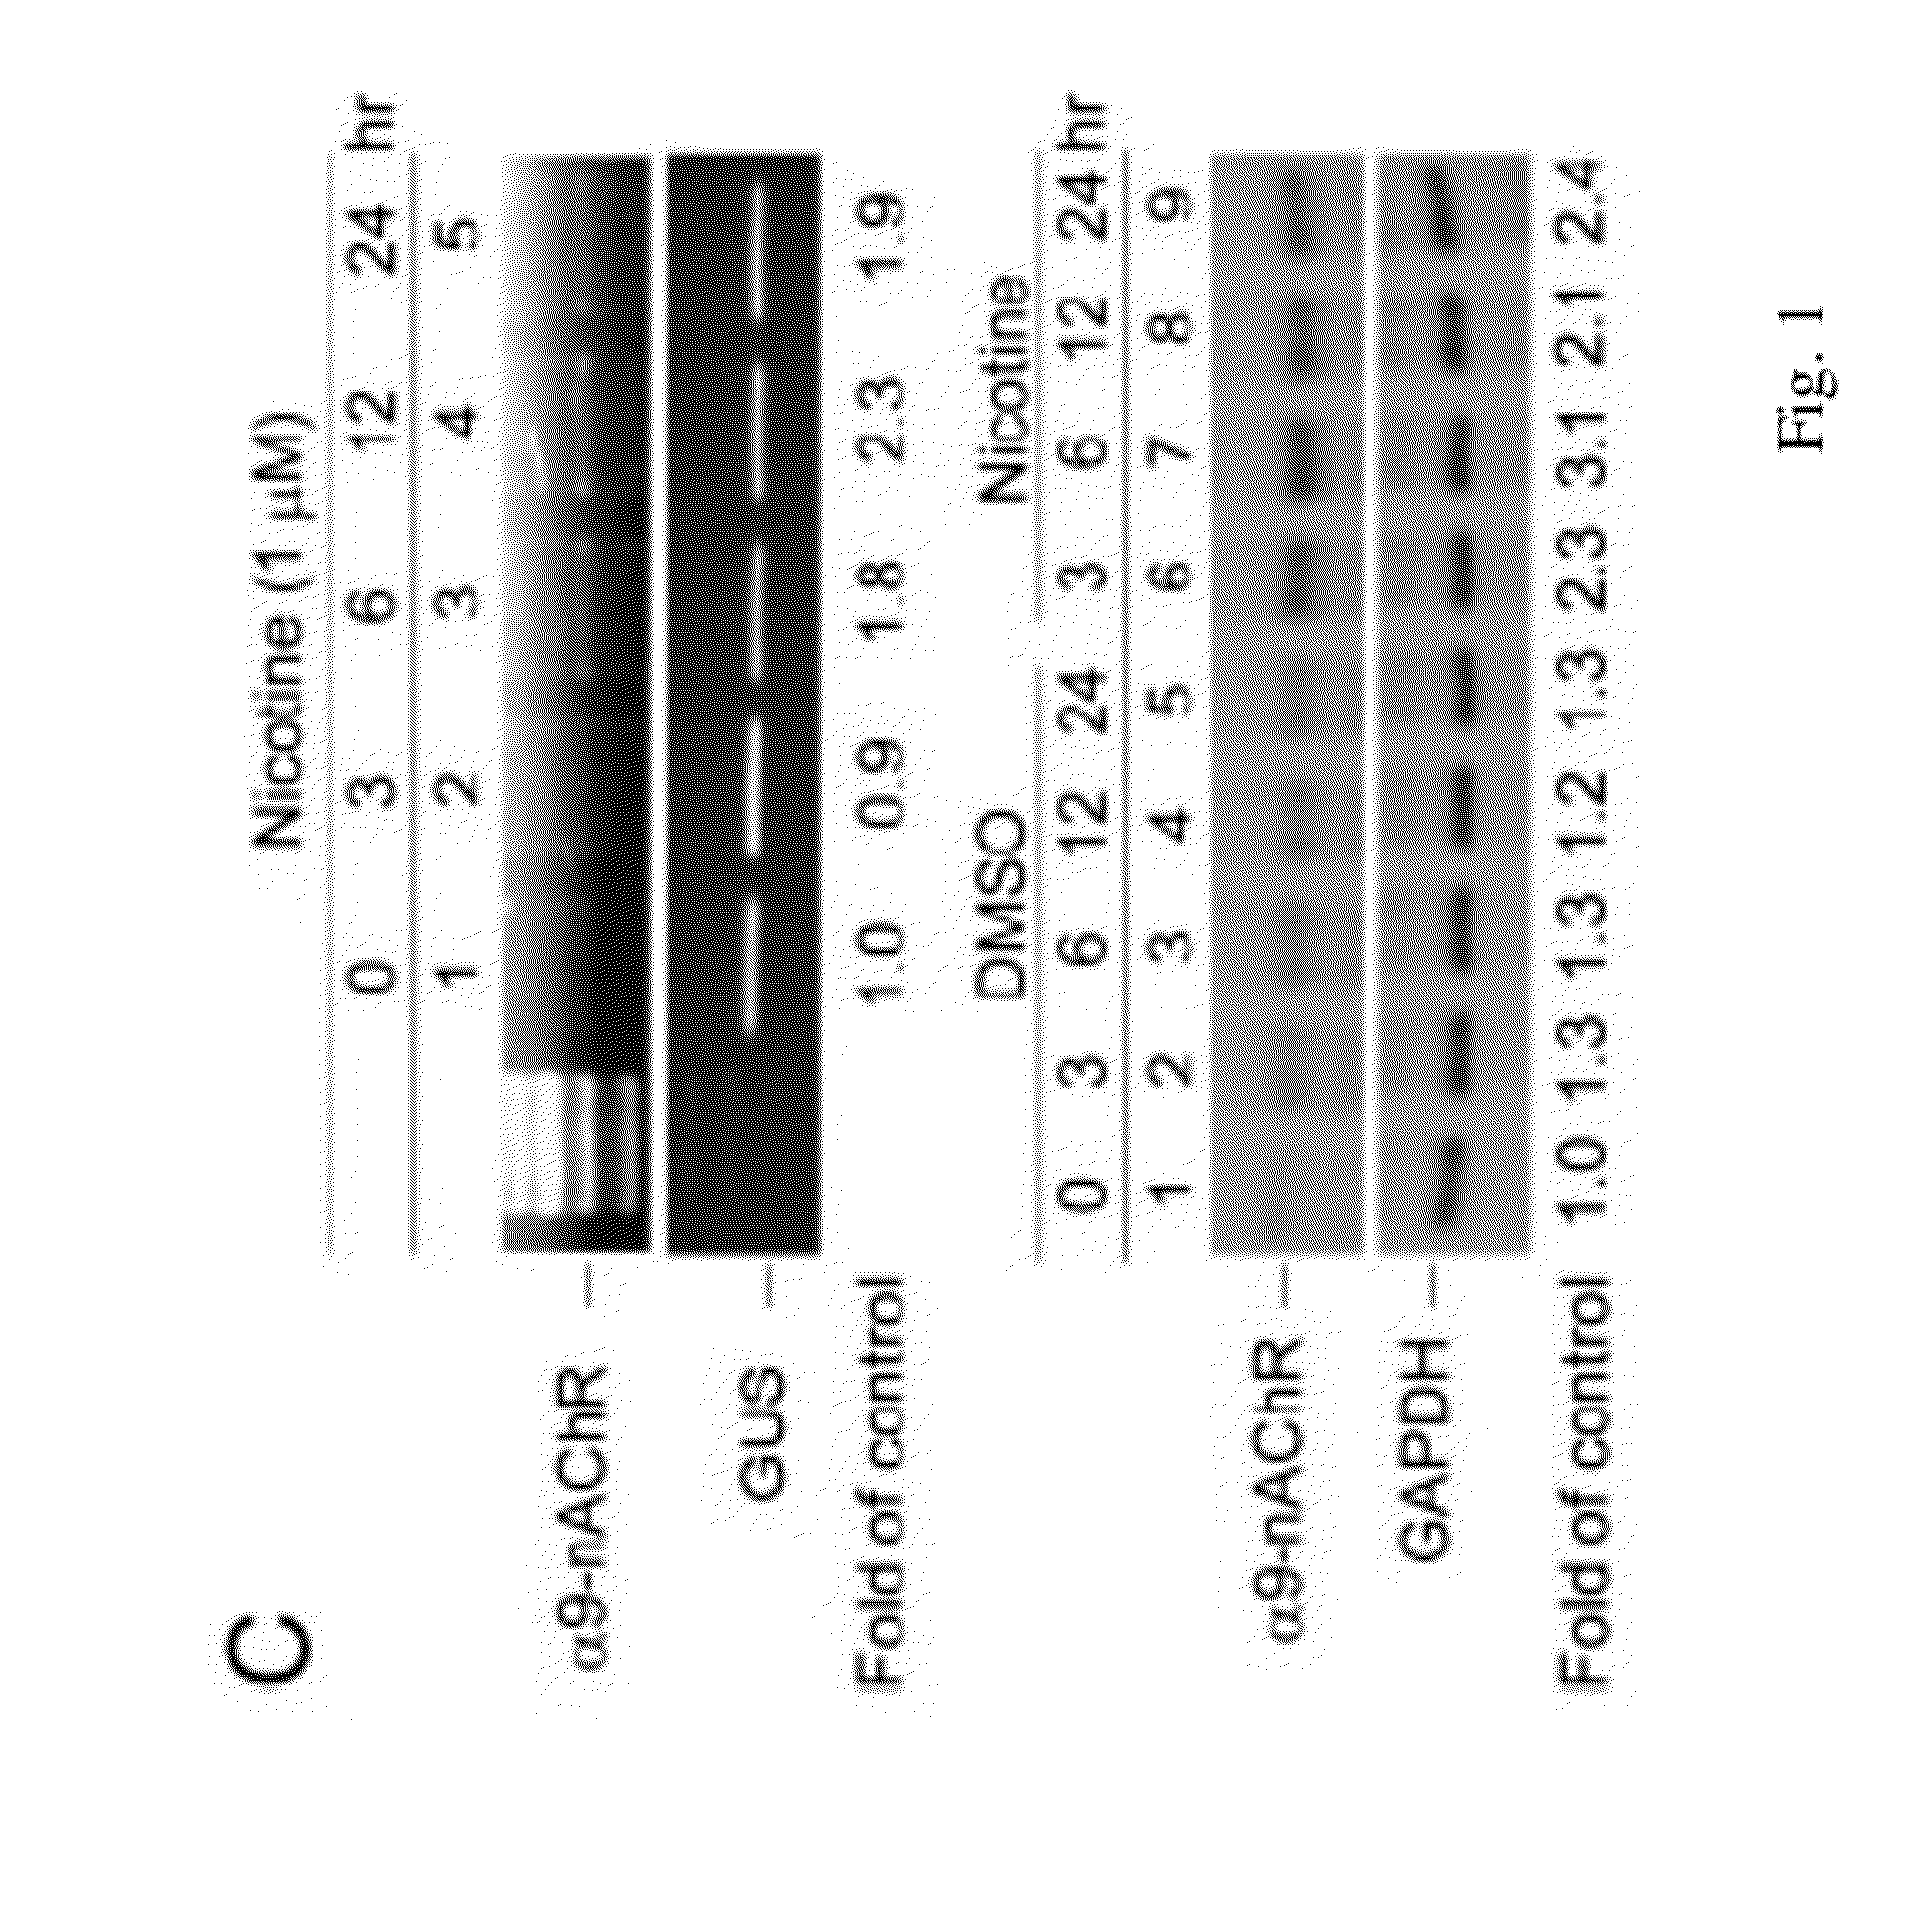 Tea polyphenols products for ceasing smoking and treating and/or preventing nicotine or nicotine-derived compounds or estrogen induced breast cancer